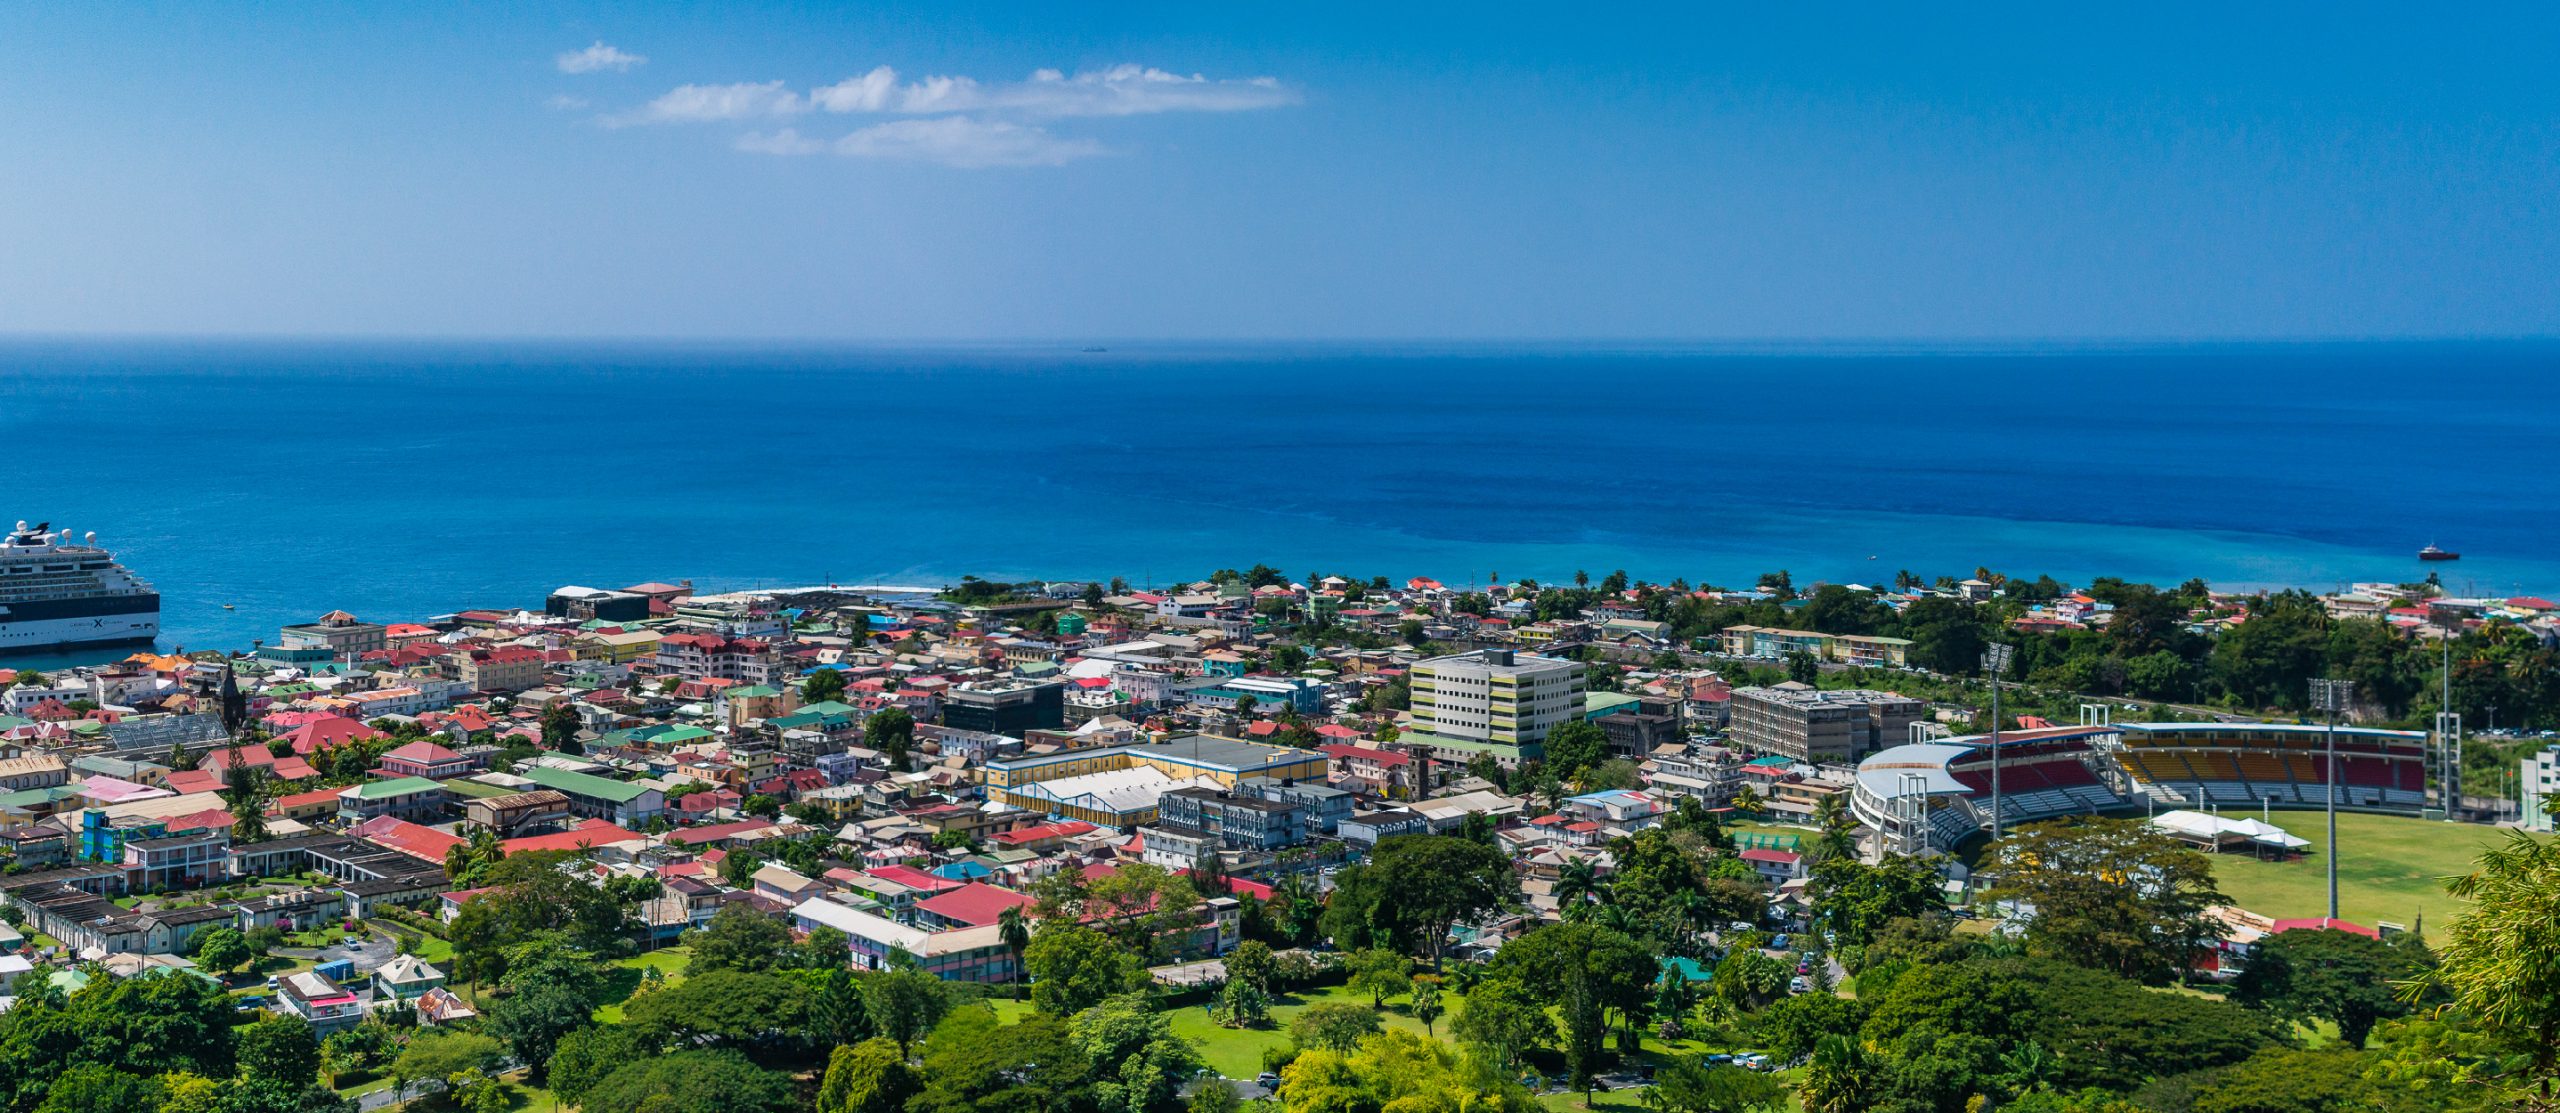 World Bank, IMF, and AID Bank among institutions aiding Dominica